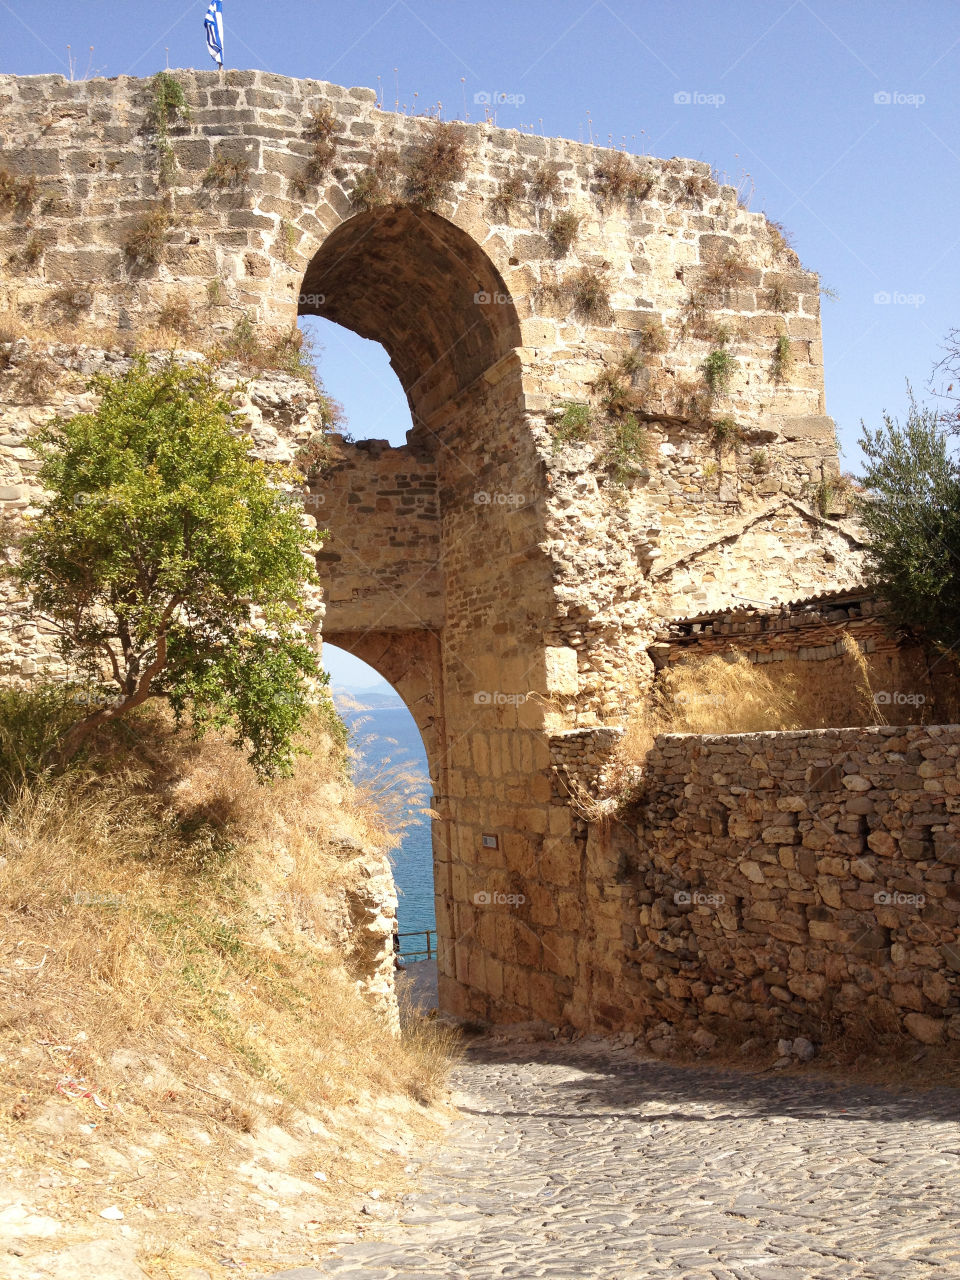 Entrance to the castle in Koroni, Greece with a slight view of the beautiful blue waters below 